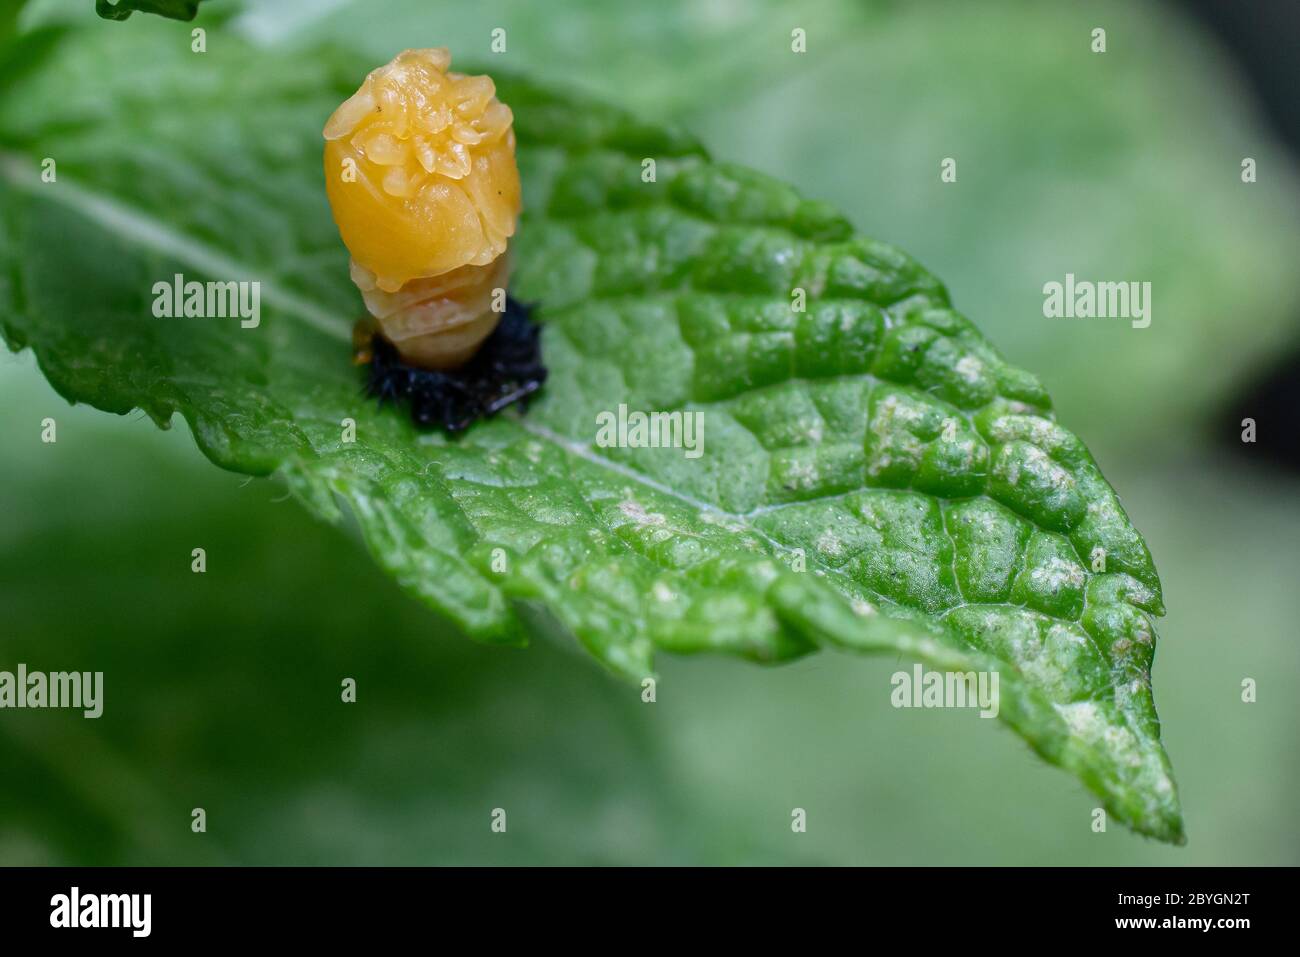 Pupation of a ladybug on a mint leaf in spring. Macro shot of living insect. Series image 1 of 9 Stock Photo